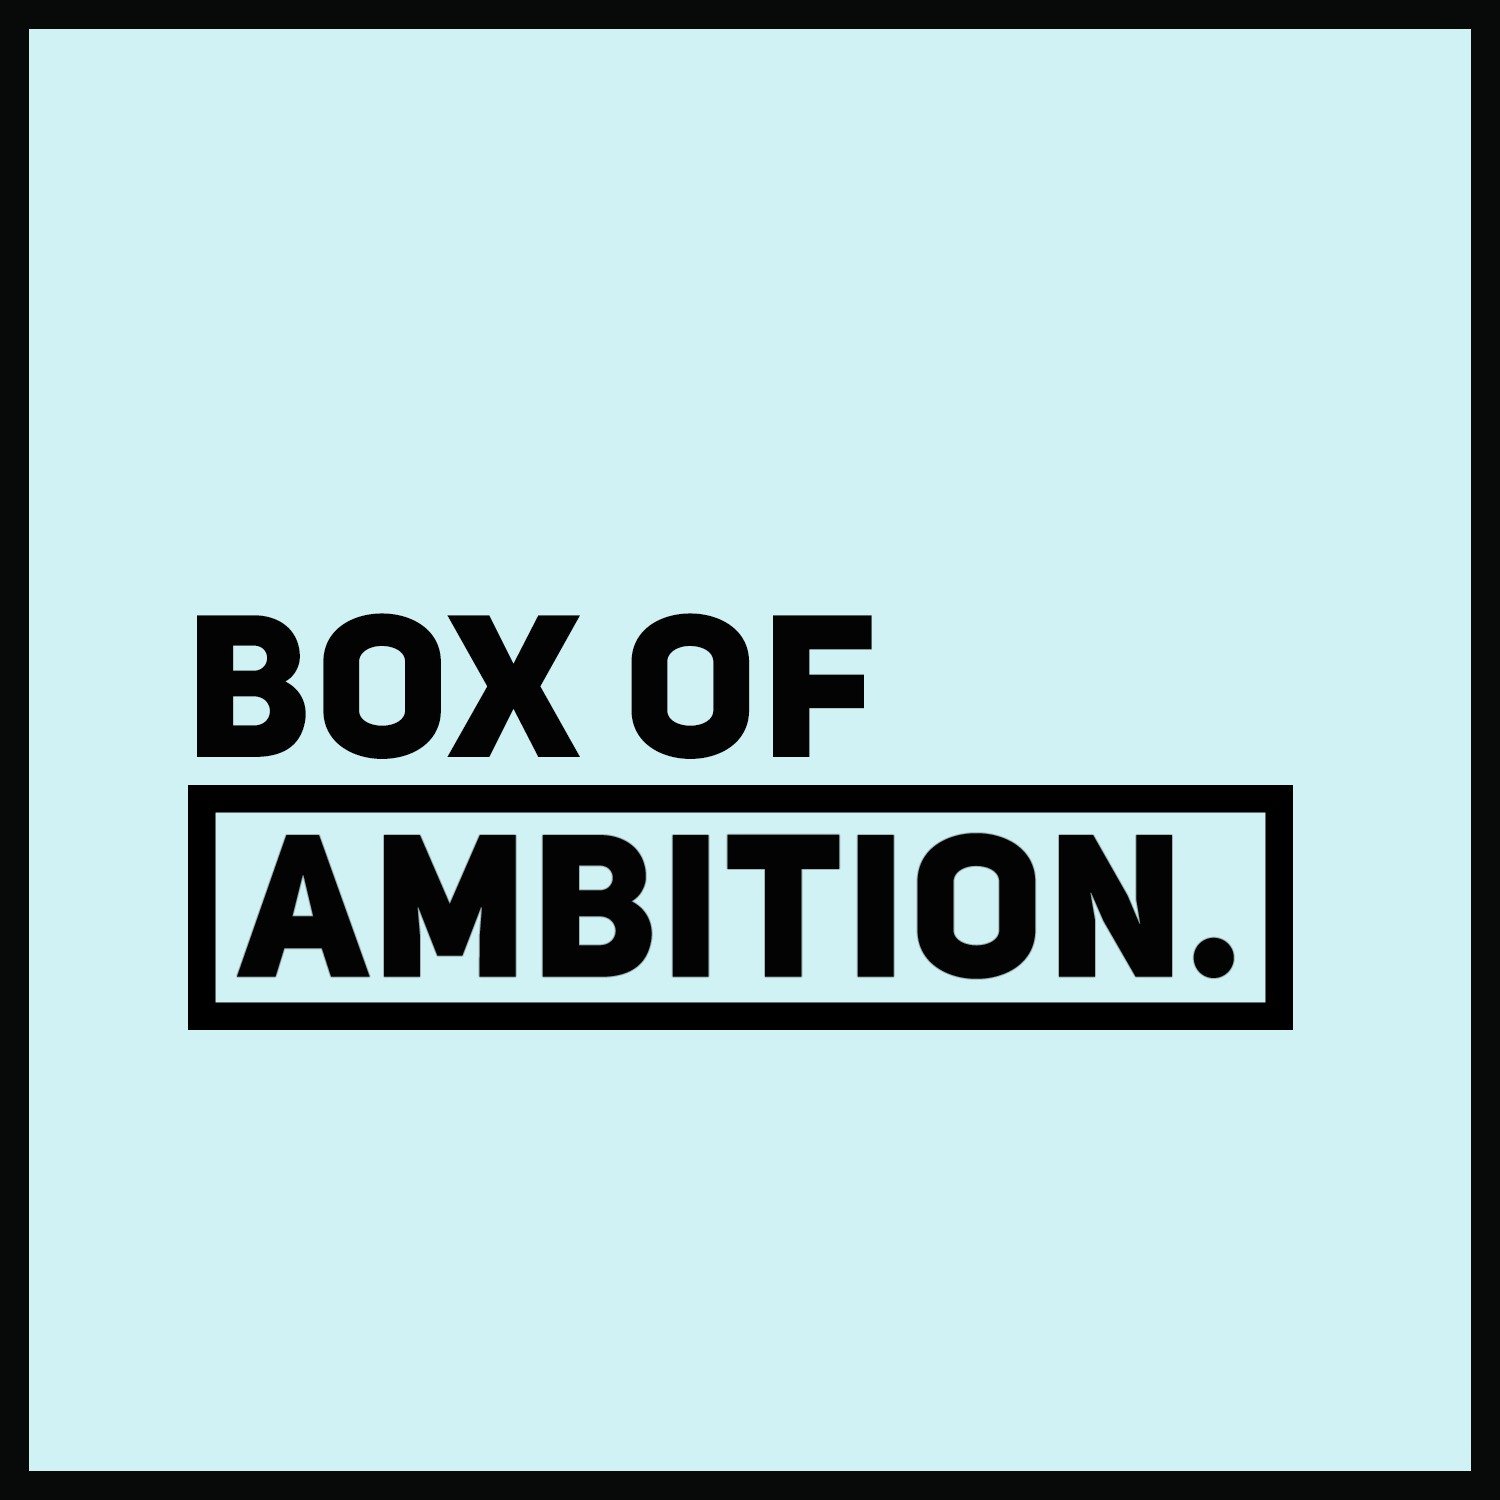 A BRAND NEW SUBSCRIPTION BOX SERVICE CREATED FOR THE AMBITIOUS. LAUNCHING SOON. #DREAM #BELIEVE #ACHIEVE